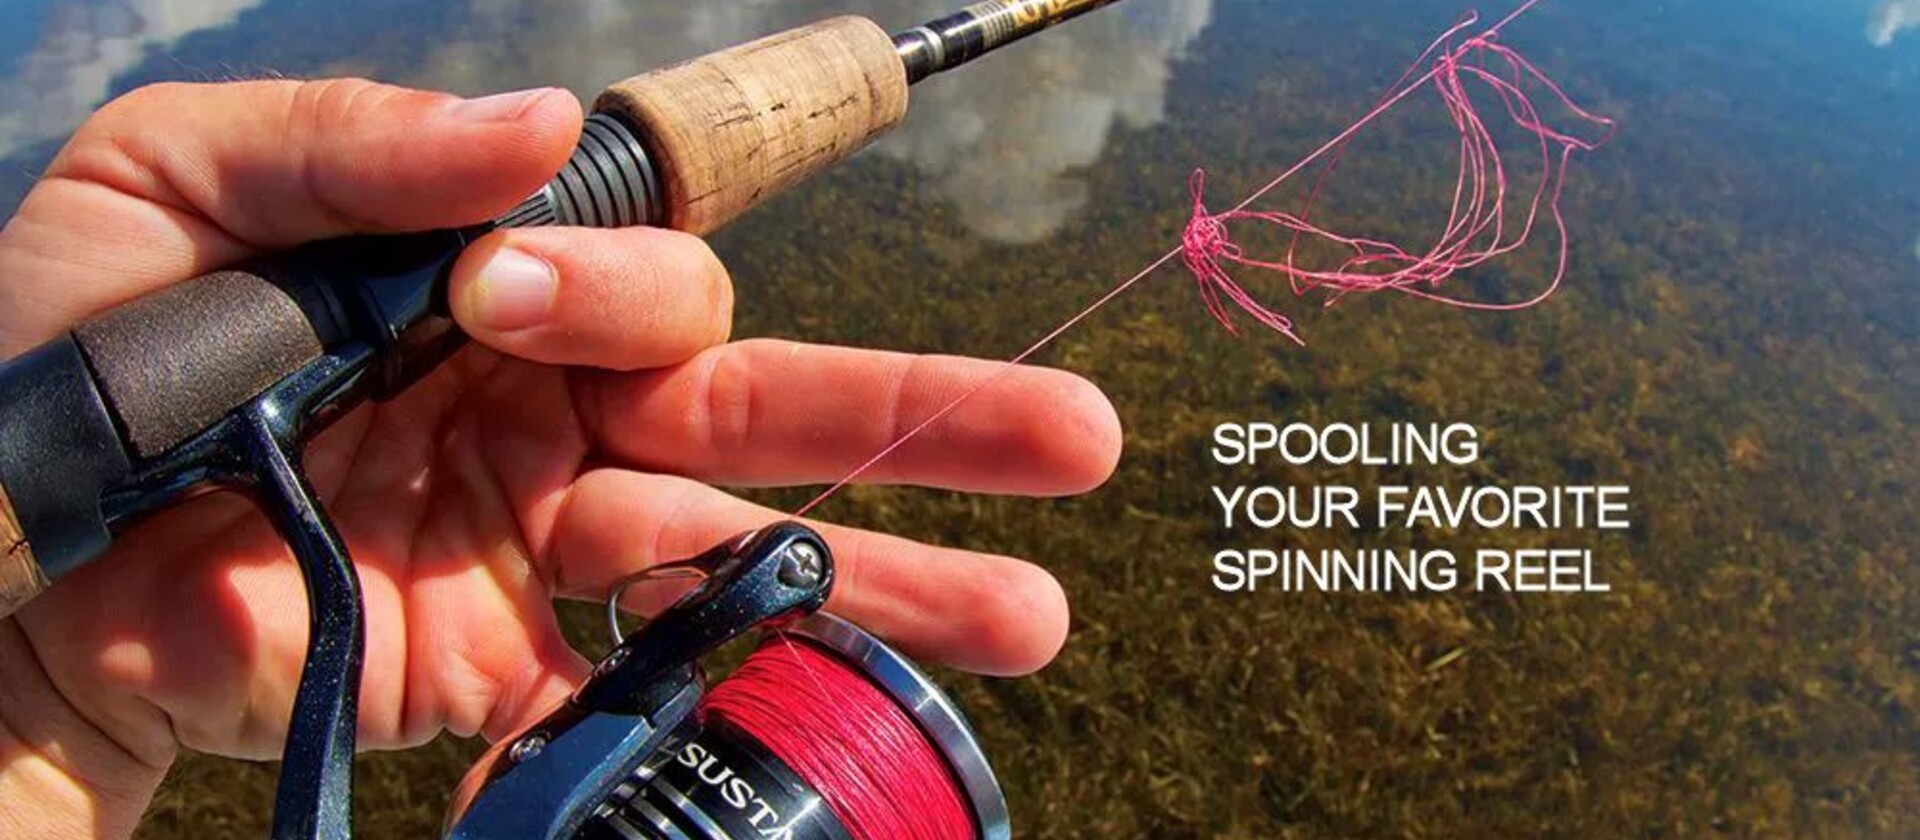 How to Put New Line on Spinning Reel: An Easy Guide to Spooling a Reel with  Mono, Fluoro or Braid 